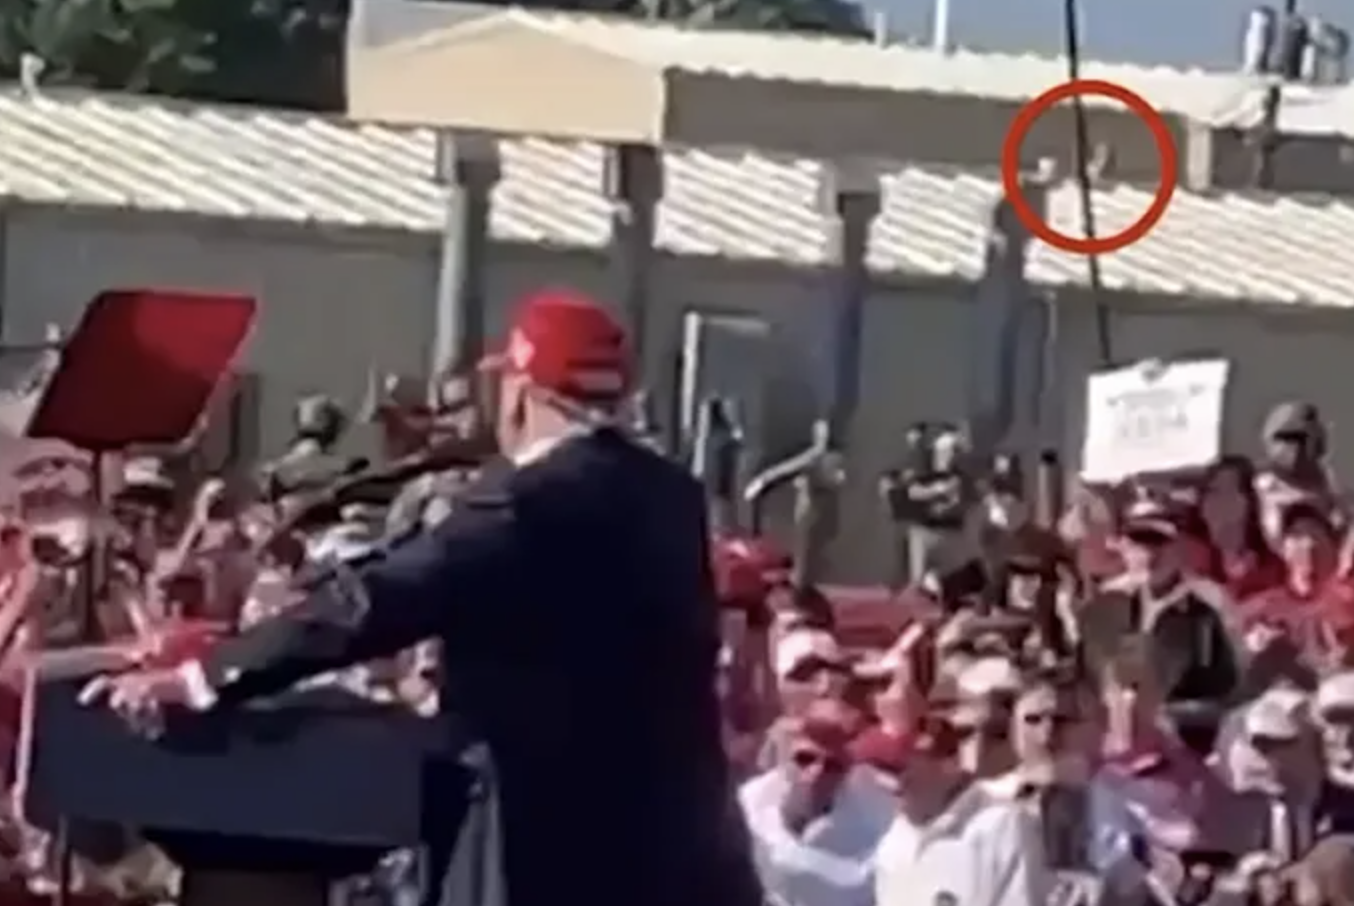 The Source |[WATCH] New Surveillance Footage Shows Trump Shooter On Roof Near Stage